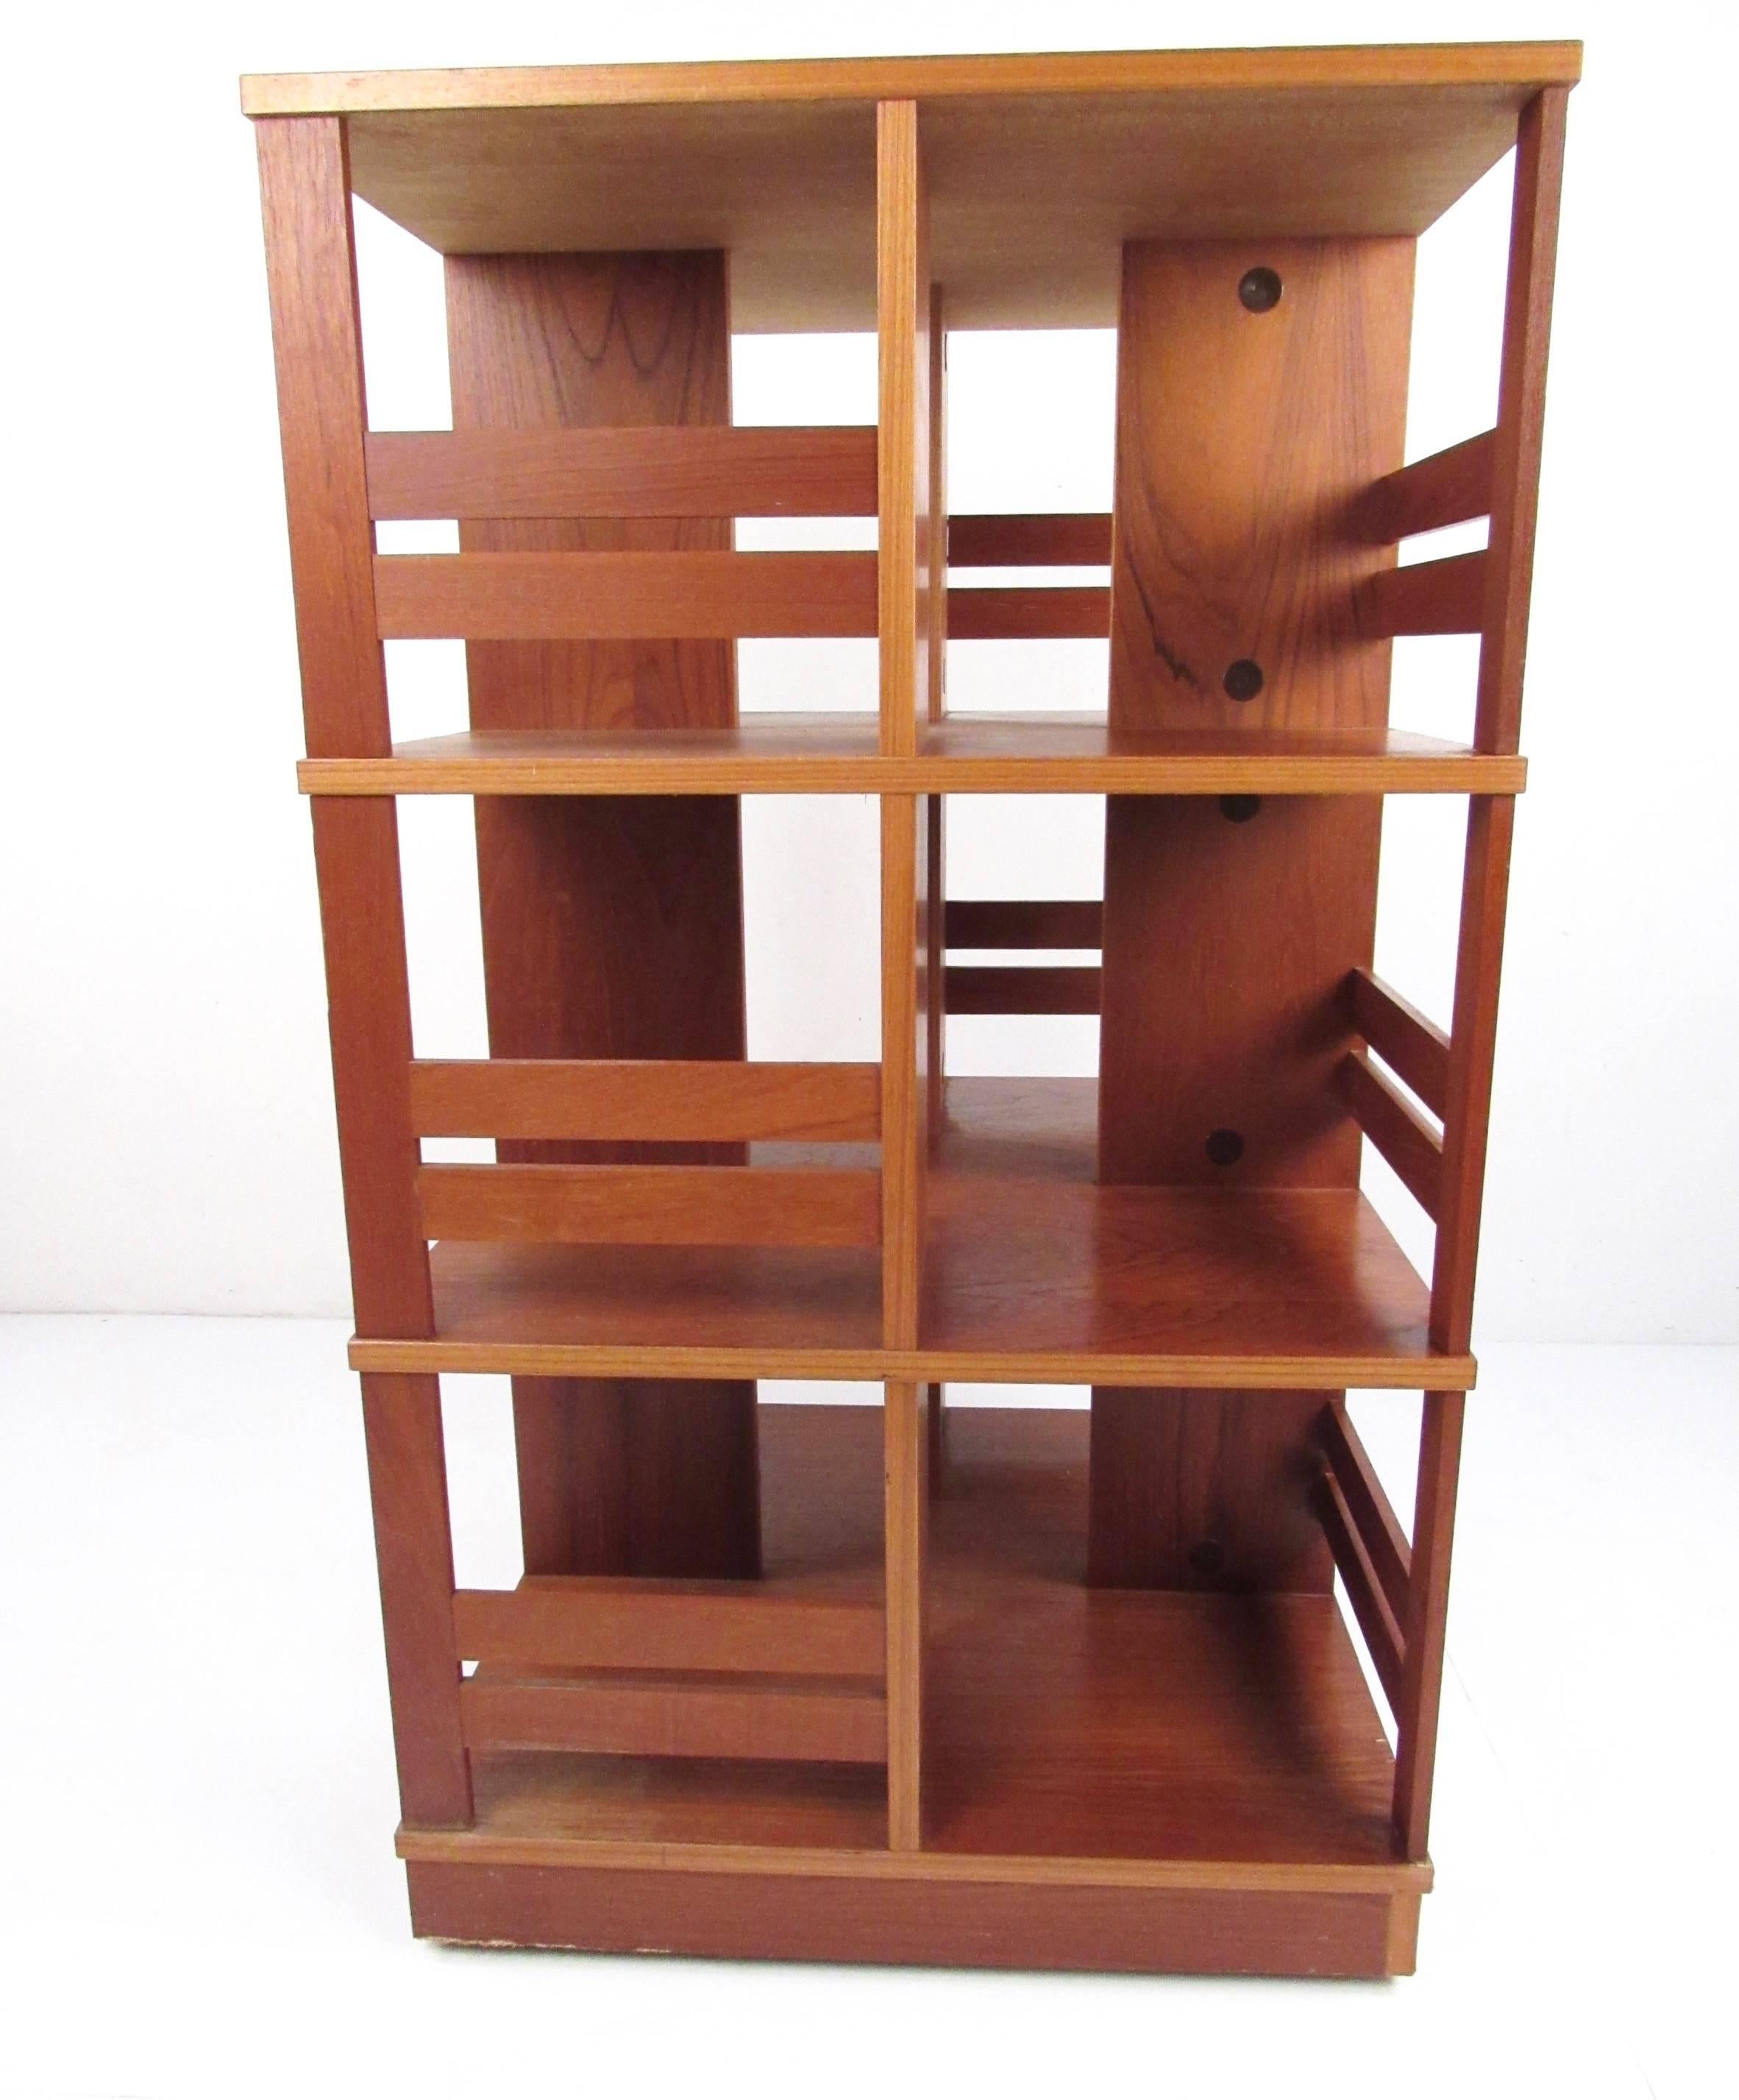 This unique Danish modern teak bookshelf features multi-side storage and a sturdy swivel base. Perfect book case or shop display shelf. Please confirm item location (NY or NJ).